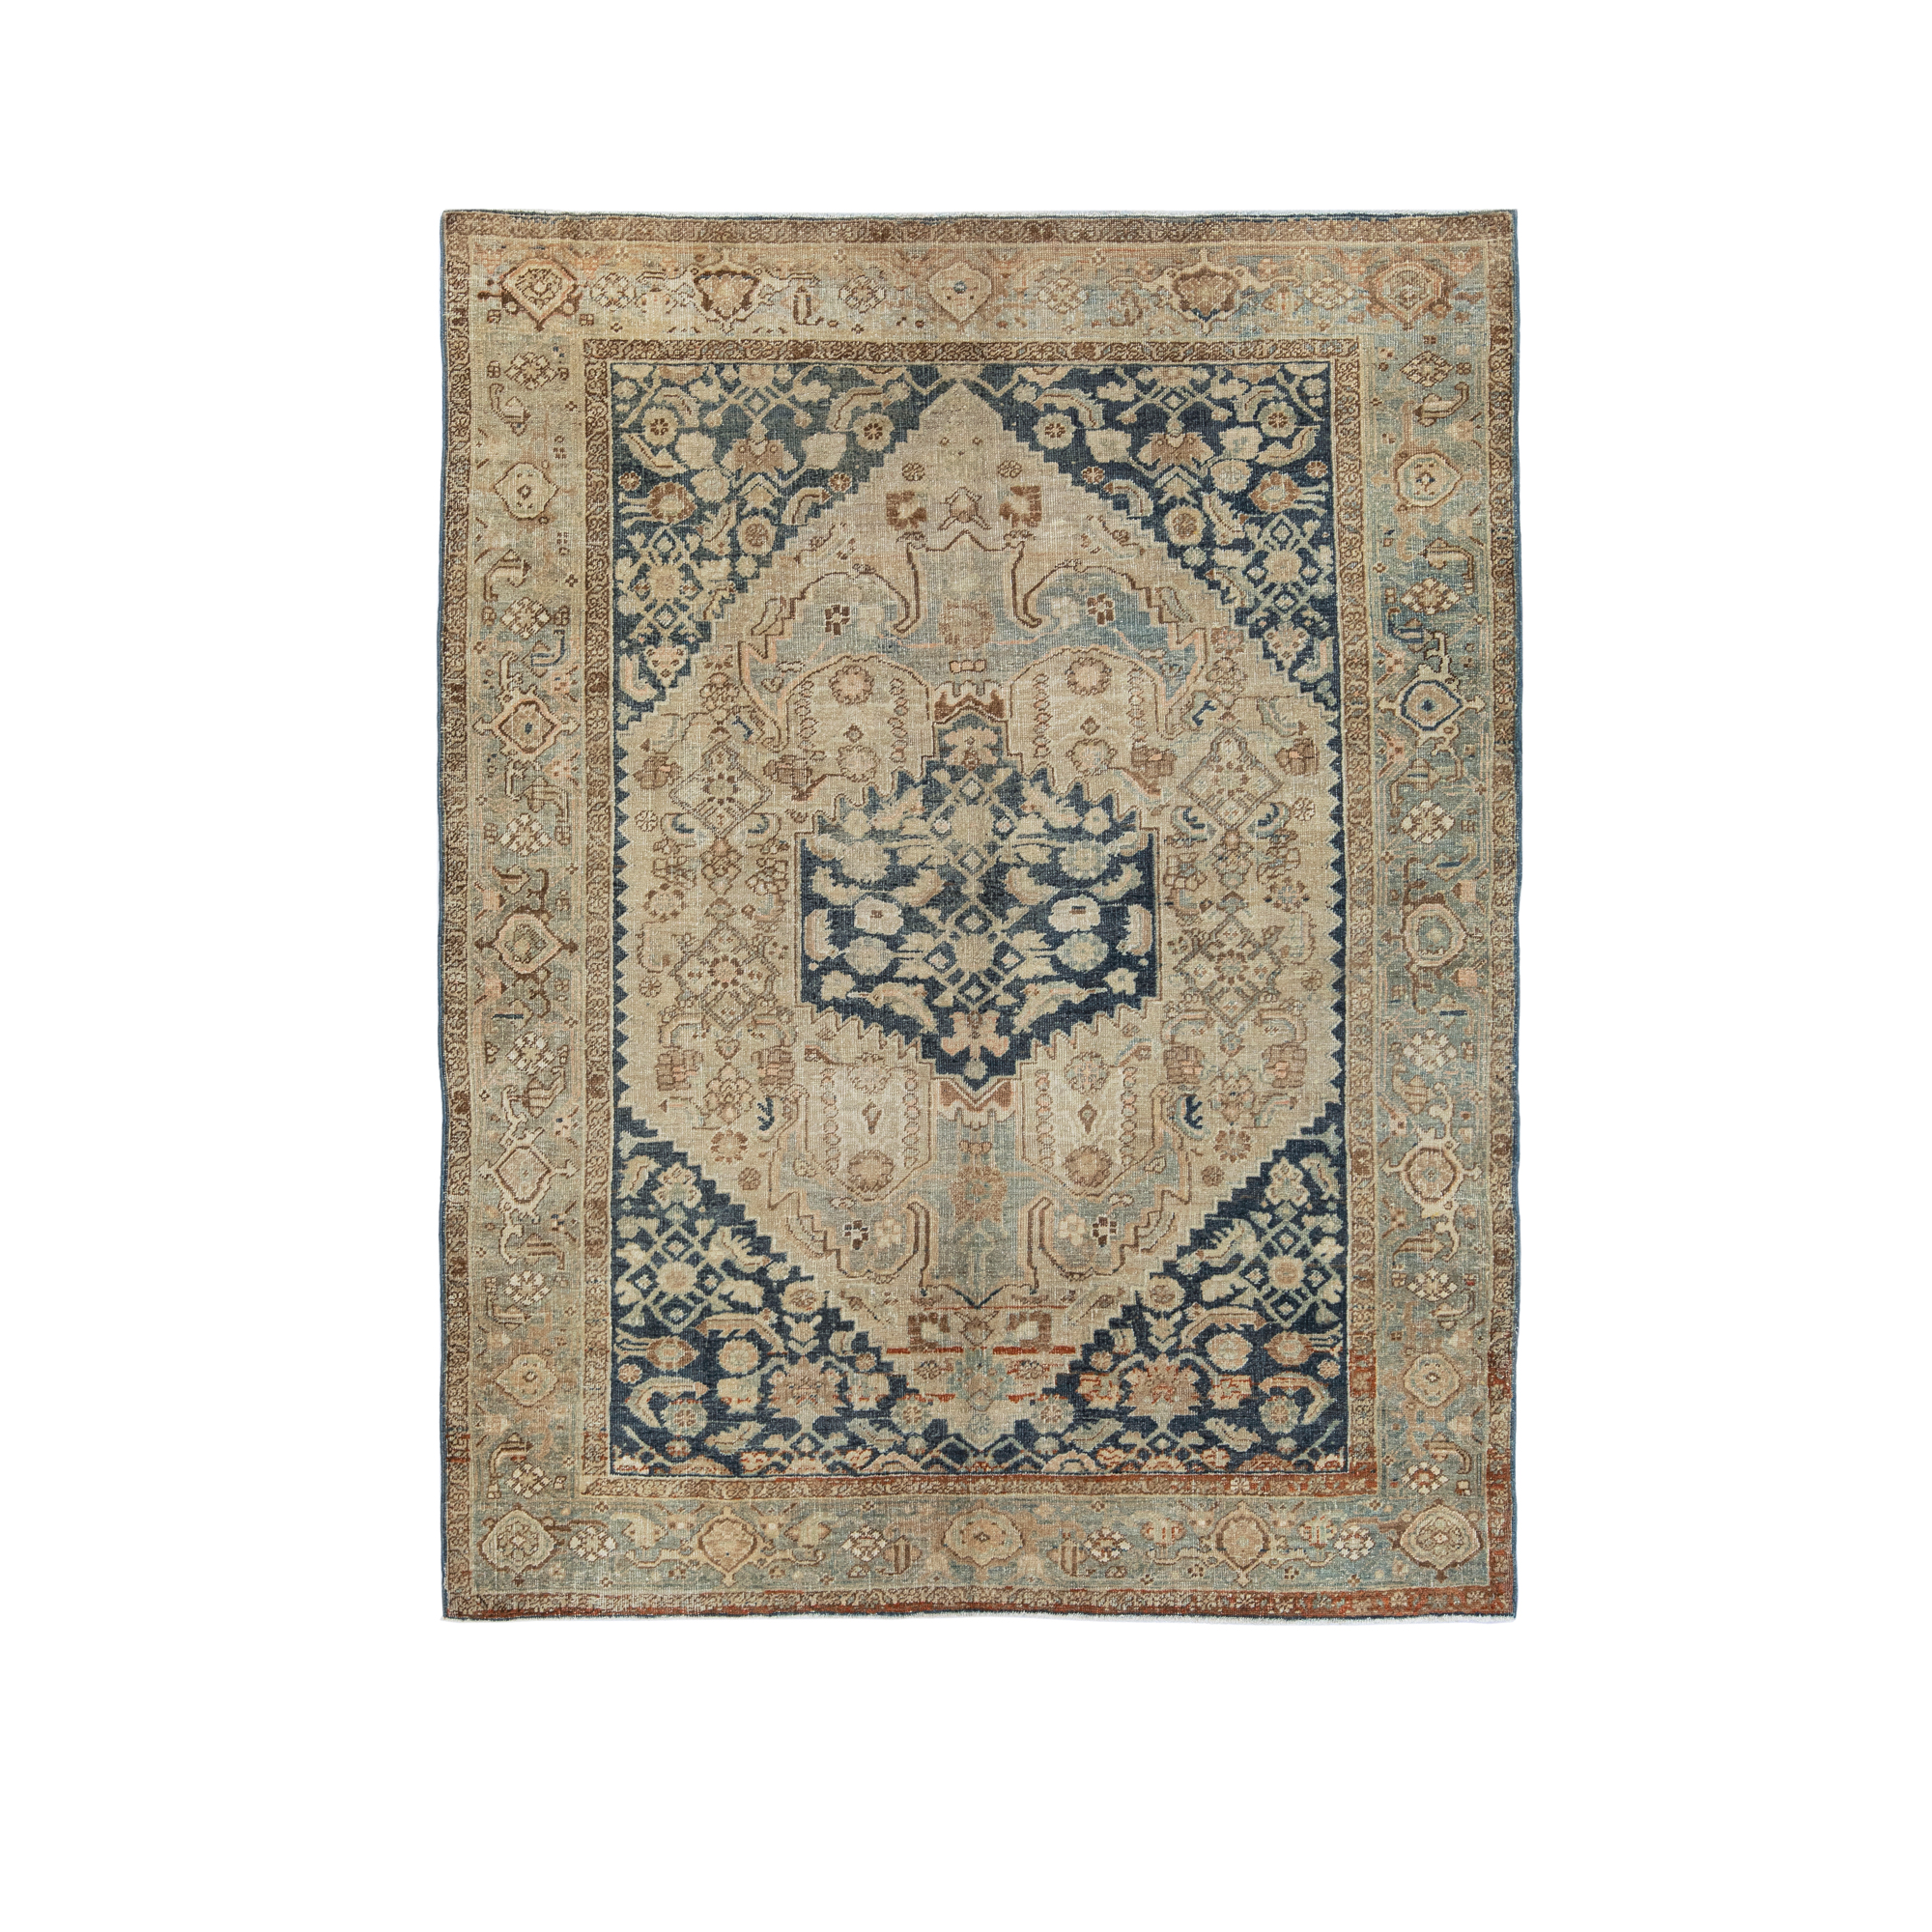 Antique Bidjar rugs are characterized by their rich motifs and have a repeated pattern or a hexagonal field bound by a border